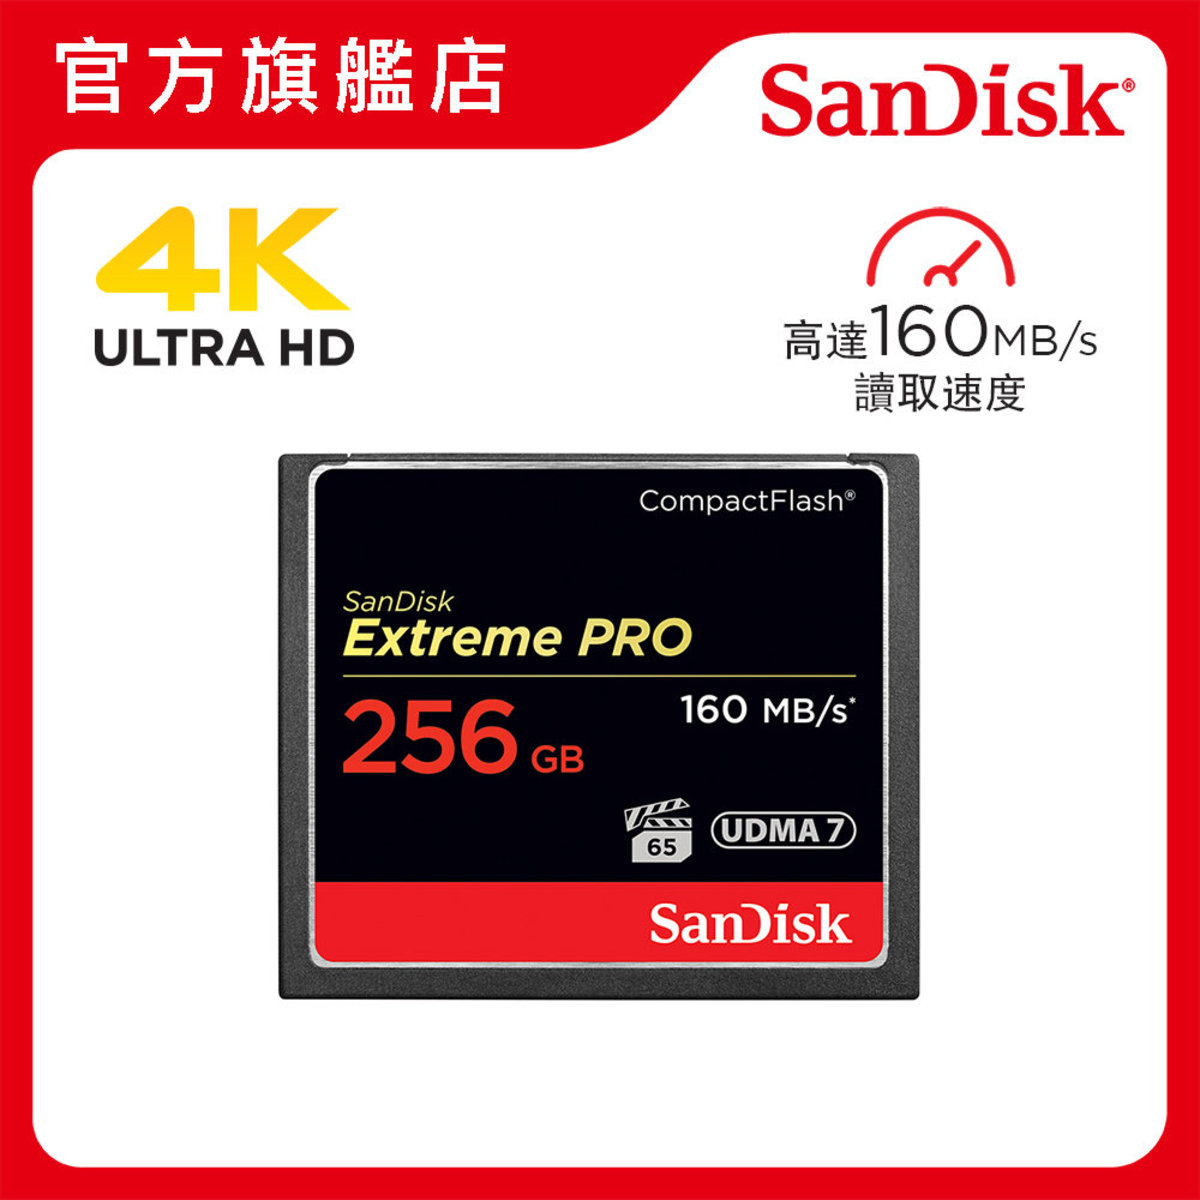 SanDisk | Extreme PRO CompactFlash 160MB/s 256GB Memory Card